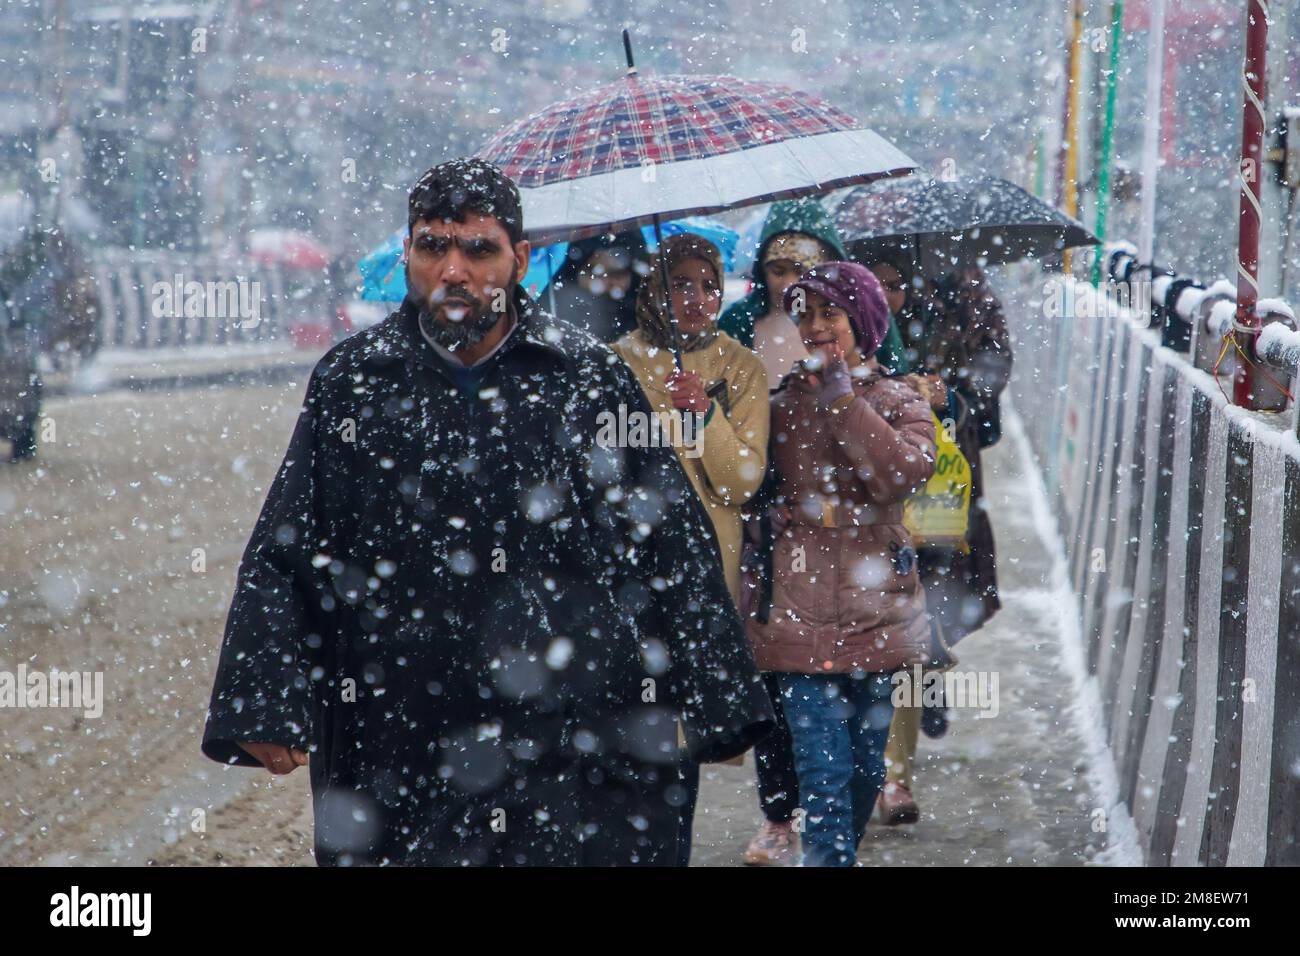 People walk through a street amid ongoing heavy snowfall on the outskirts of Srinagar. At least two labourers killed on Thursday after an avalanche hits high-altitude area in central Kashmir's Sonamarg. Most parts of Kashmir received fresh snowfall that leading to the closure of Kashmir capital's main highway that connects disputed region with the rest of India. Meanwhile airport authorities suspended all flight operations till further notice due to continuous snowfall and low visibility. (Photo by Faisal Bashir/SOPA Images/Sipa USA) Stock Photo